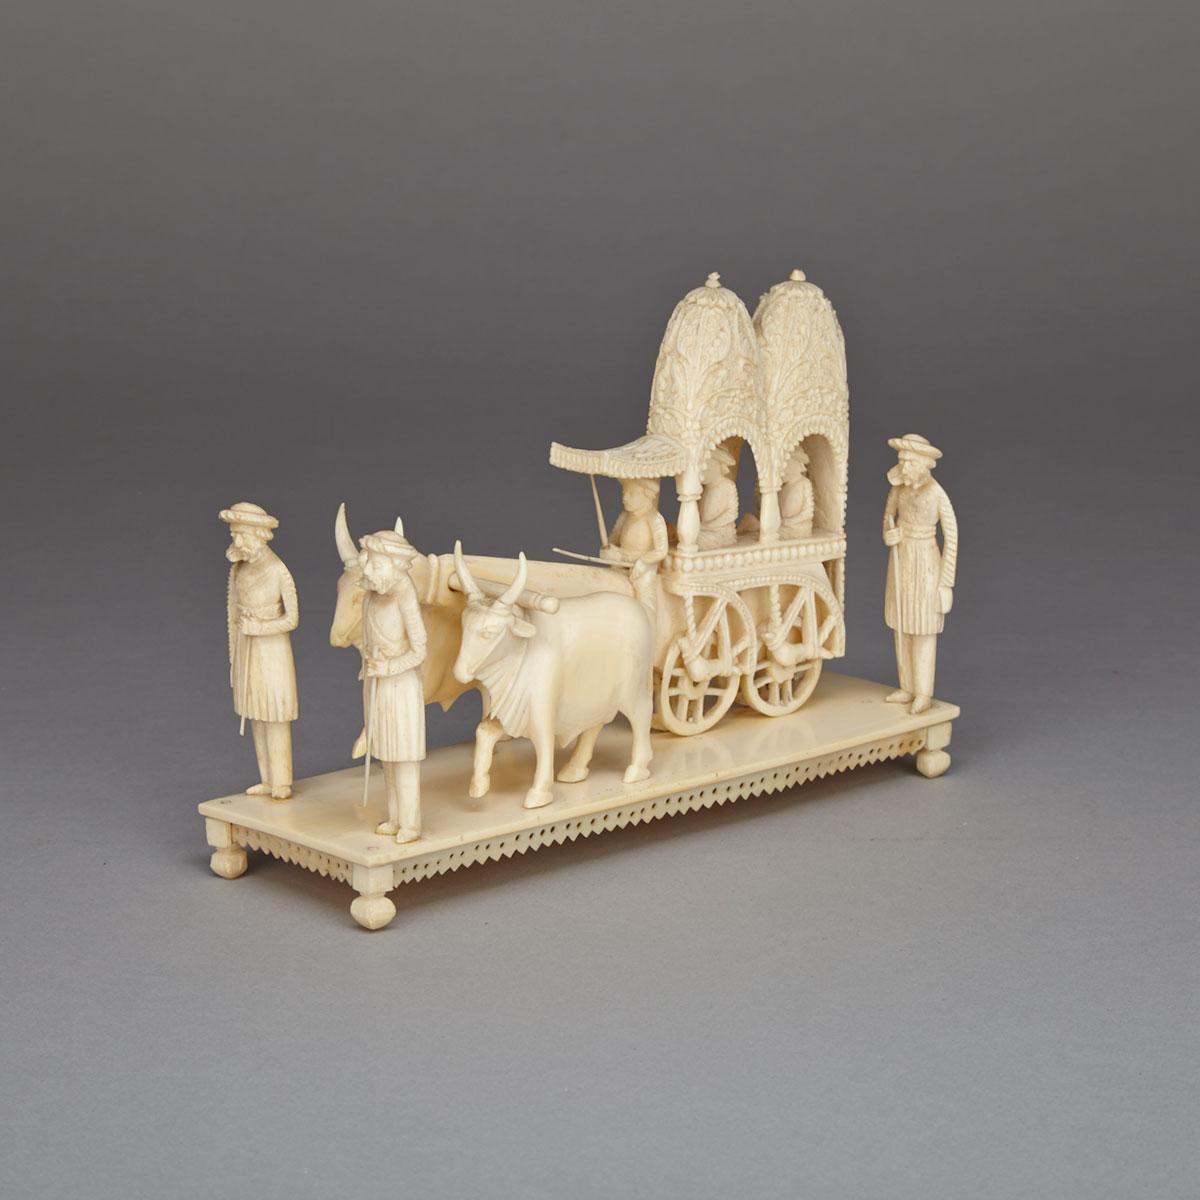 Anglo Indian John Company Carved Ivory Processional Group, Bengal, Murshidabad, mid 19th century